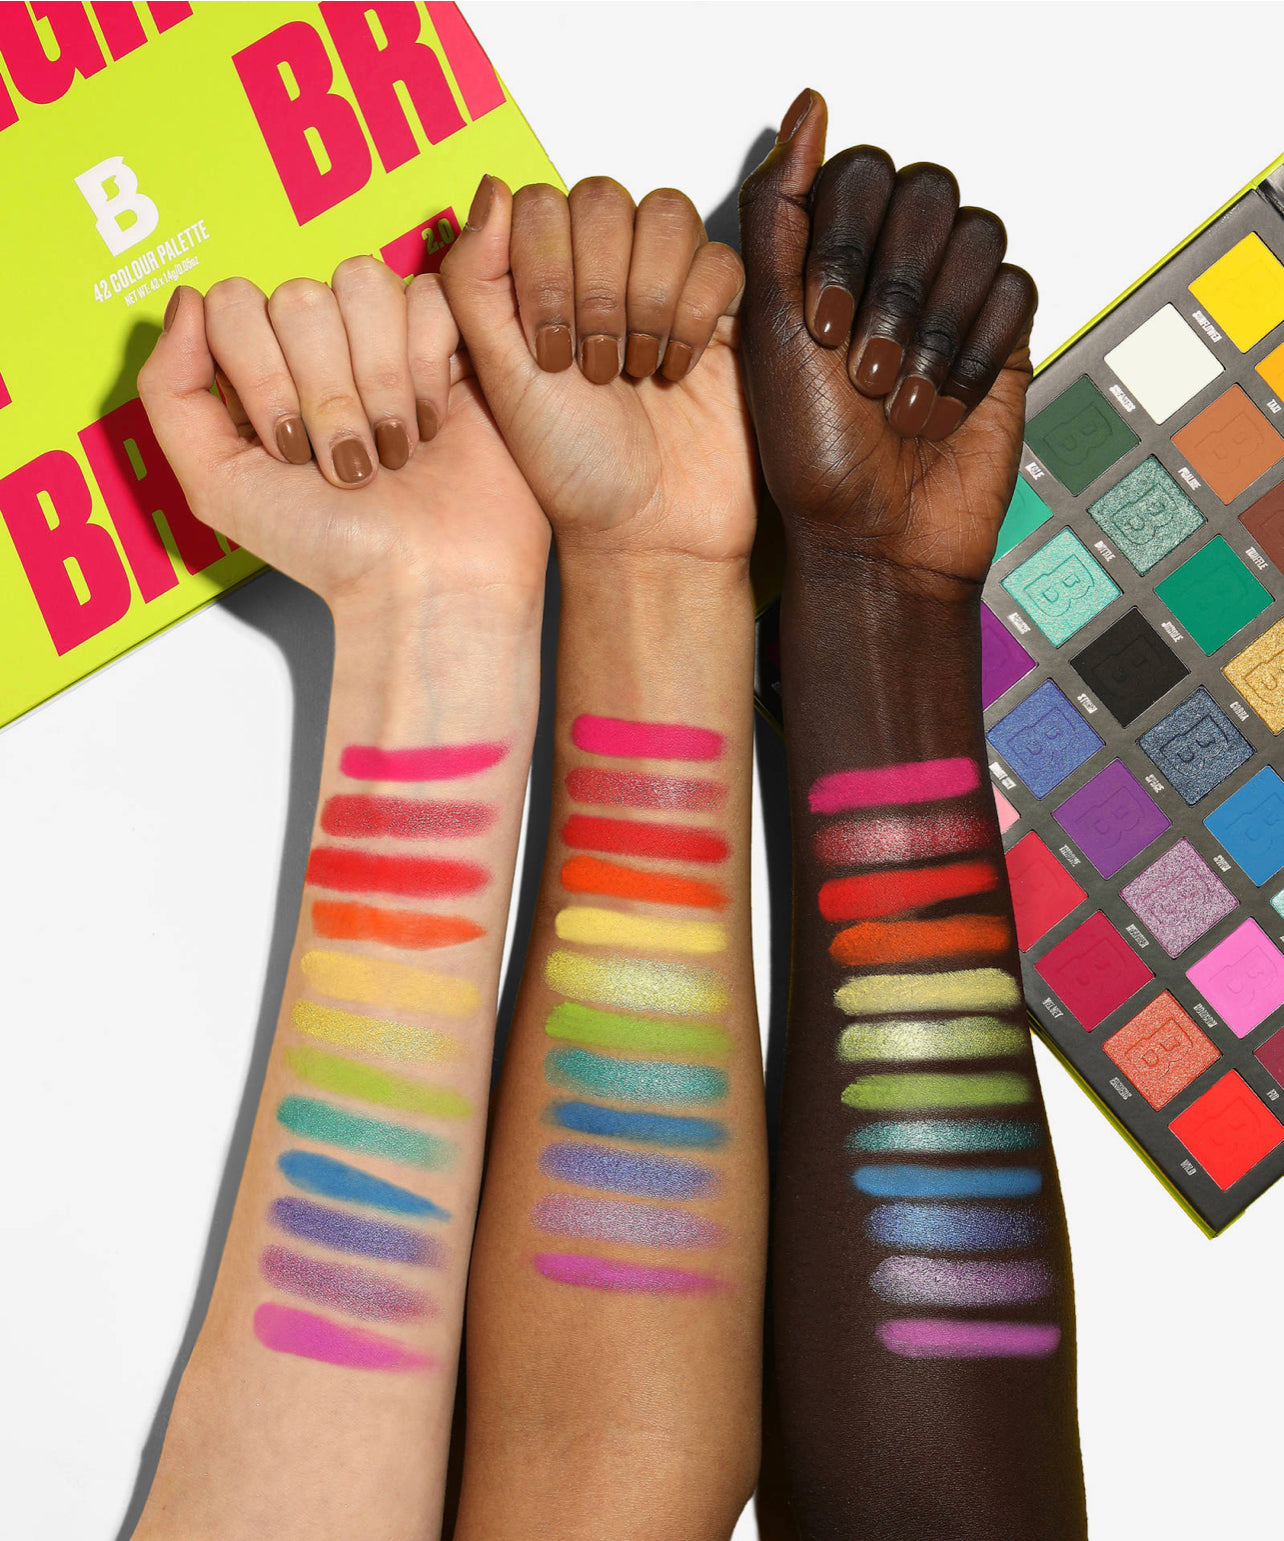 BY BEAUTY BAY BRIGHT 2  42 COLOUR PALETTE